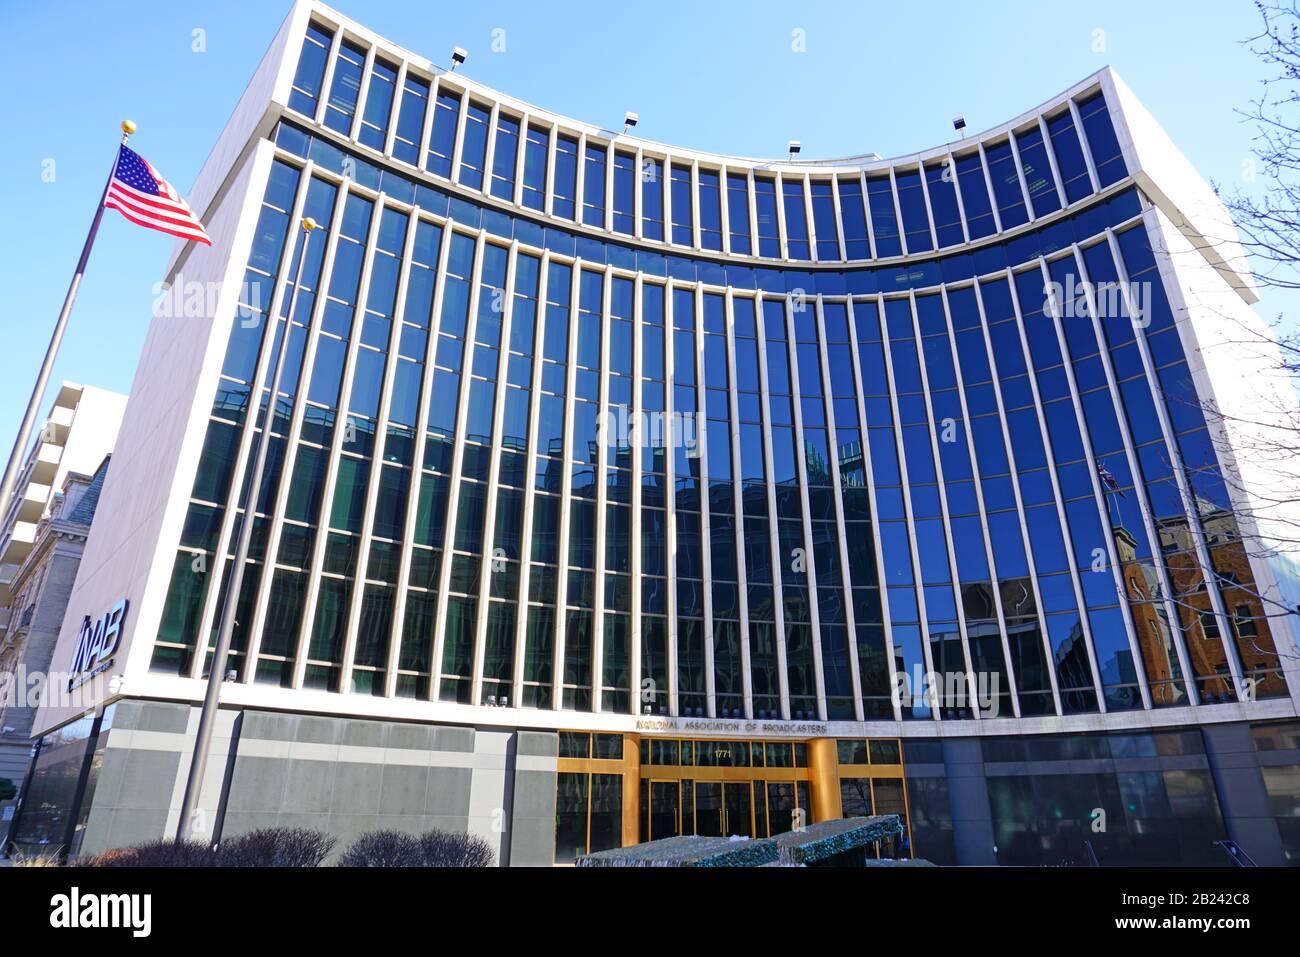 WASHINGTON, DC -21 FEB 2020- View of the headquarters building of the National Association of Broadcasters (NAB) located in Washington DC. Stock Photo